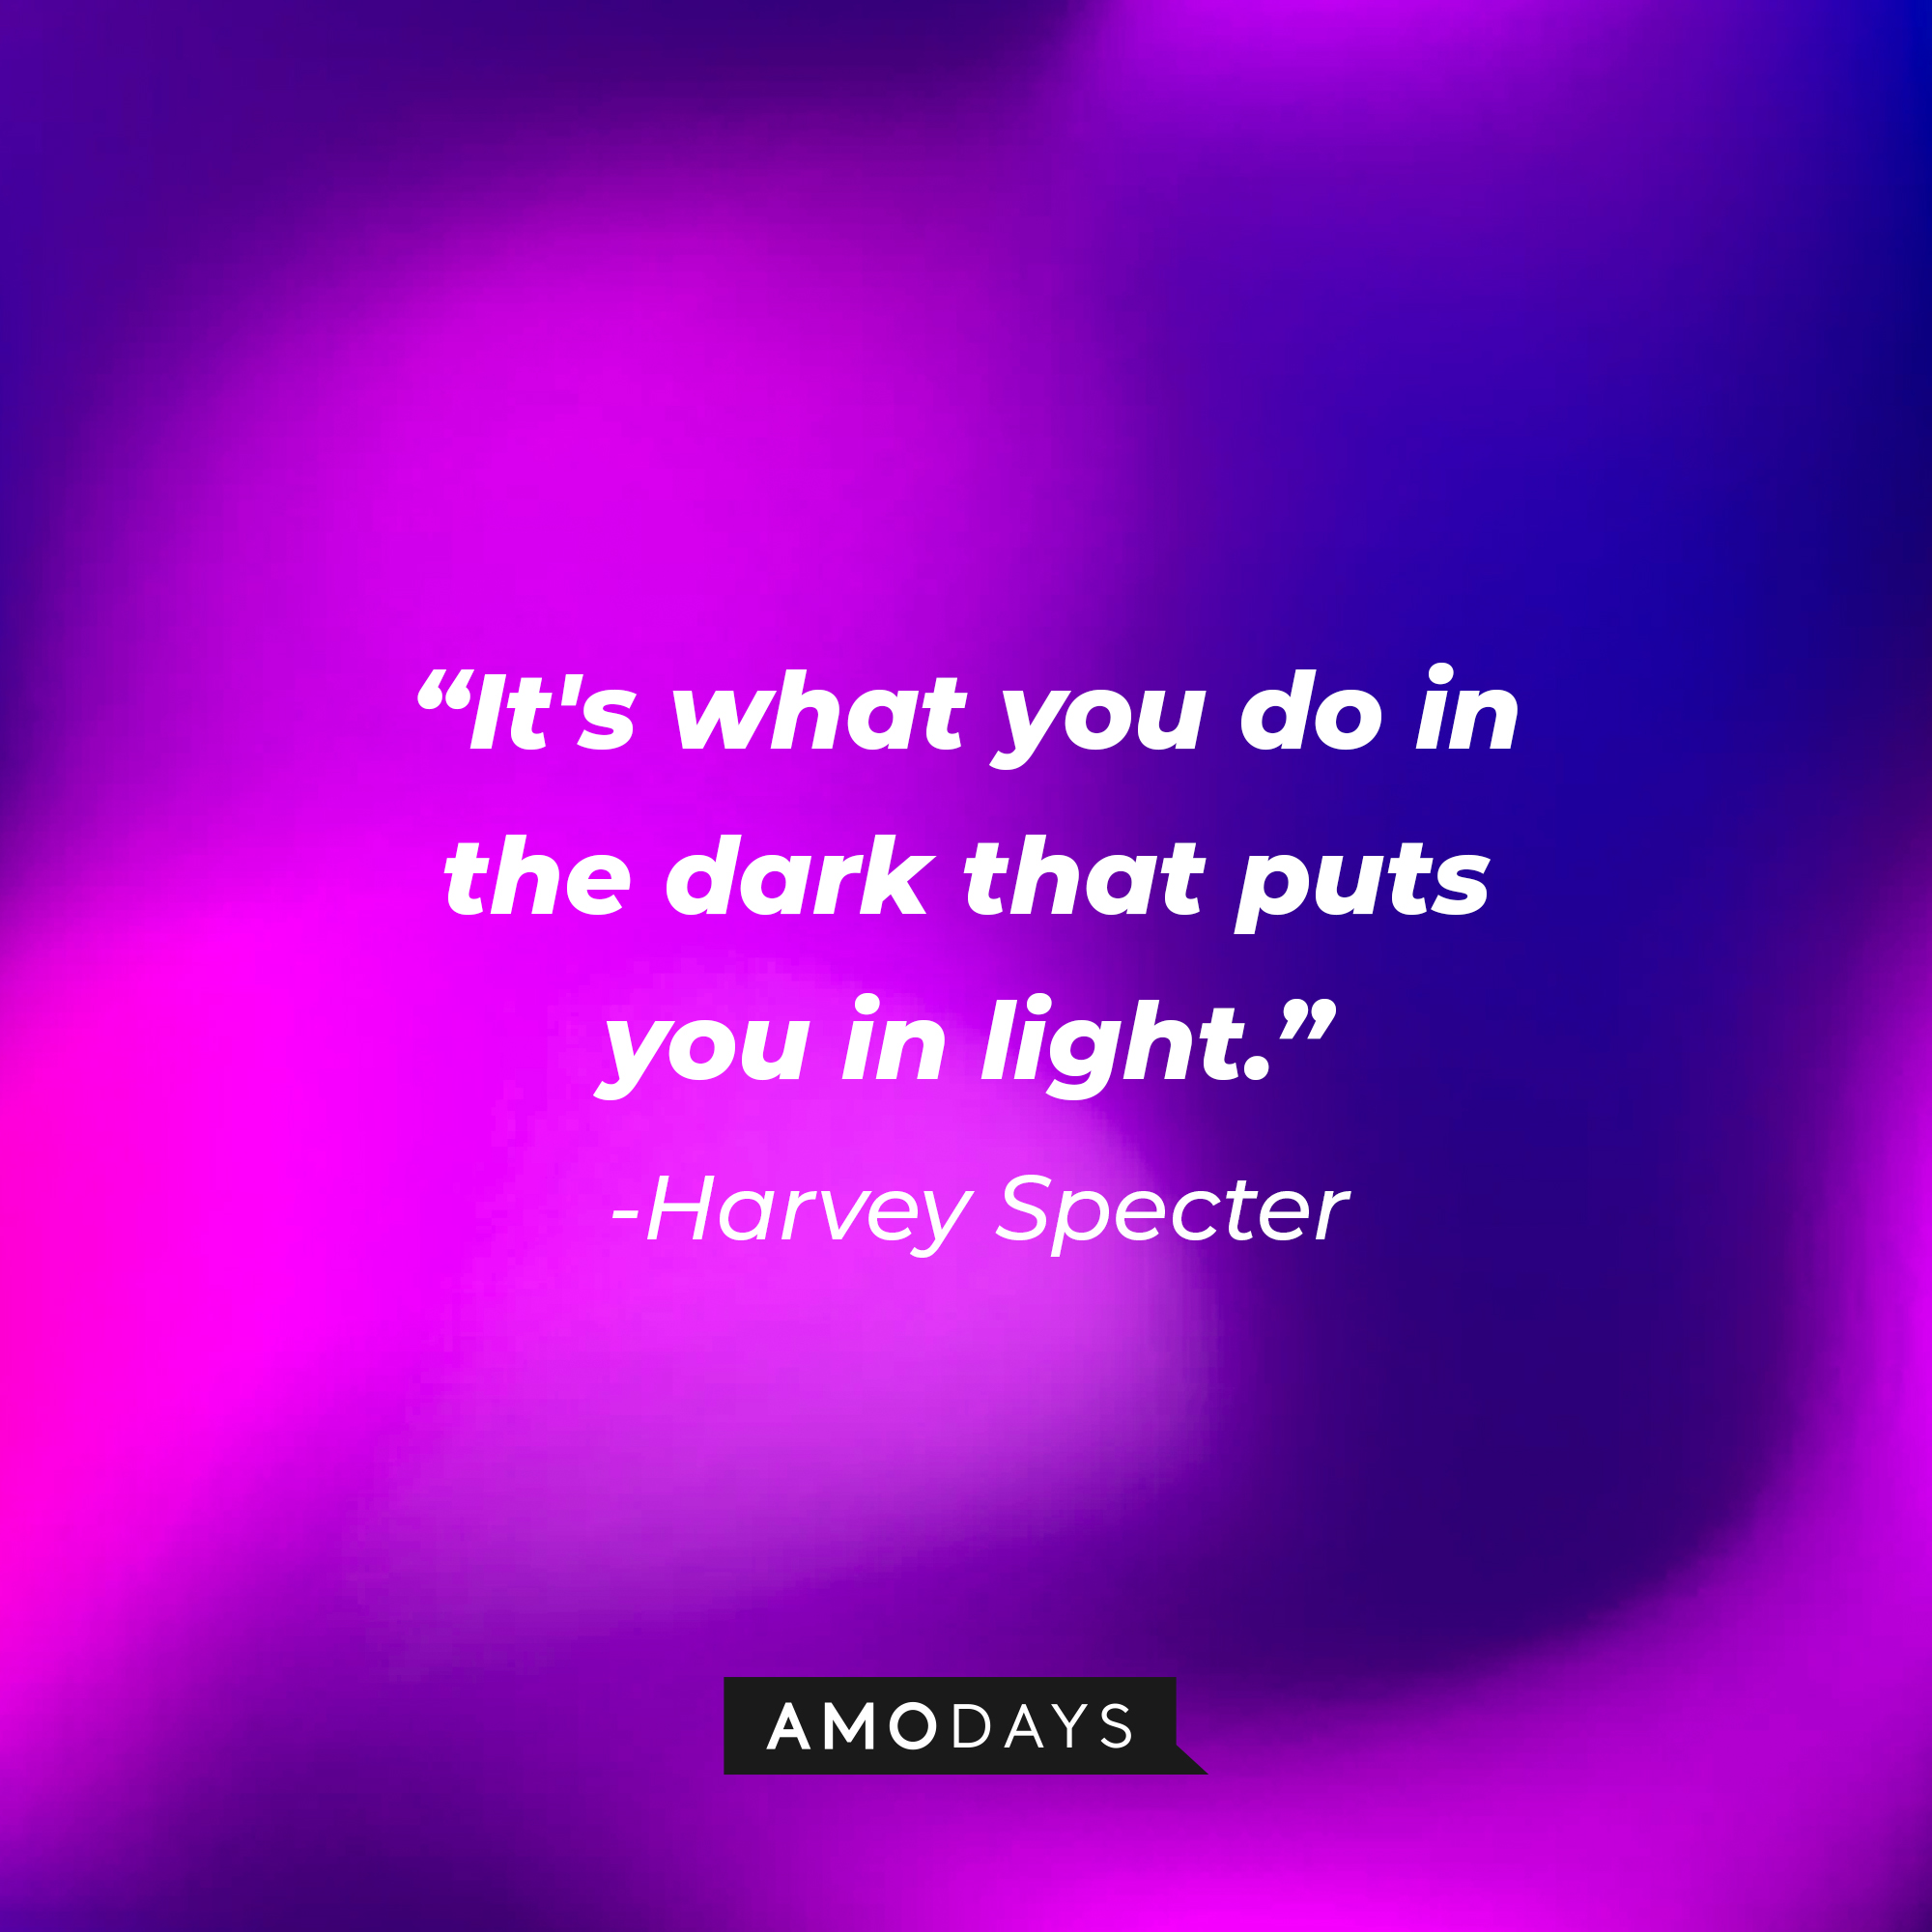 Harvey Specter's quote from "Suits" : "It's what you do in the dark that puts you in light." | Source: Amodays